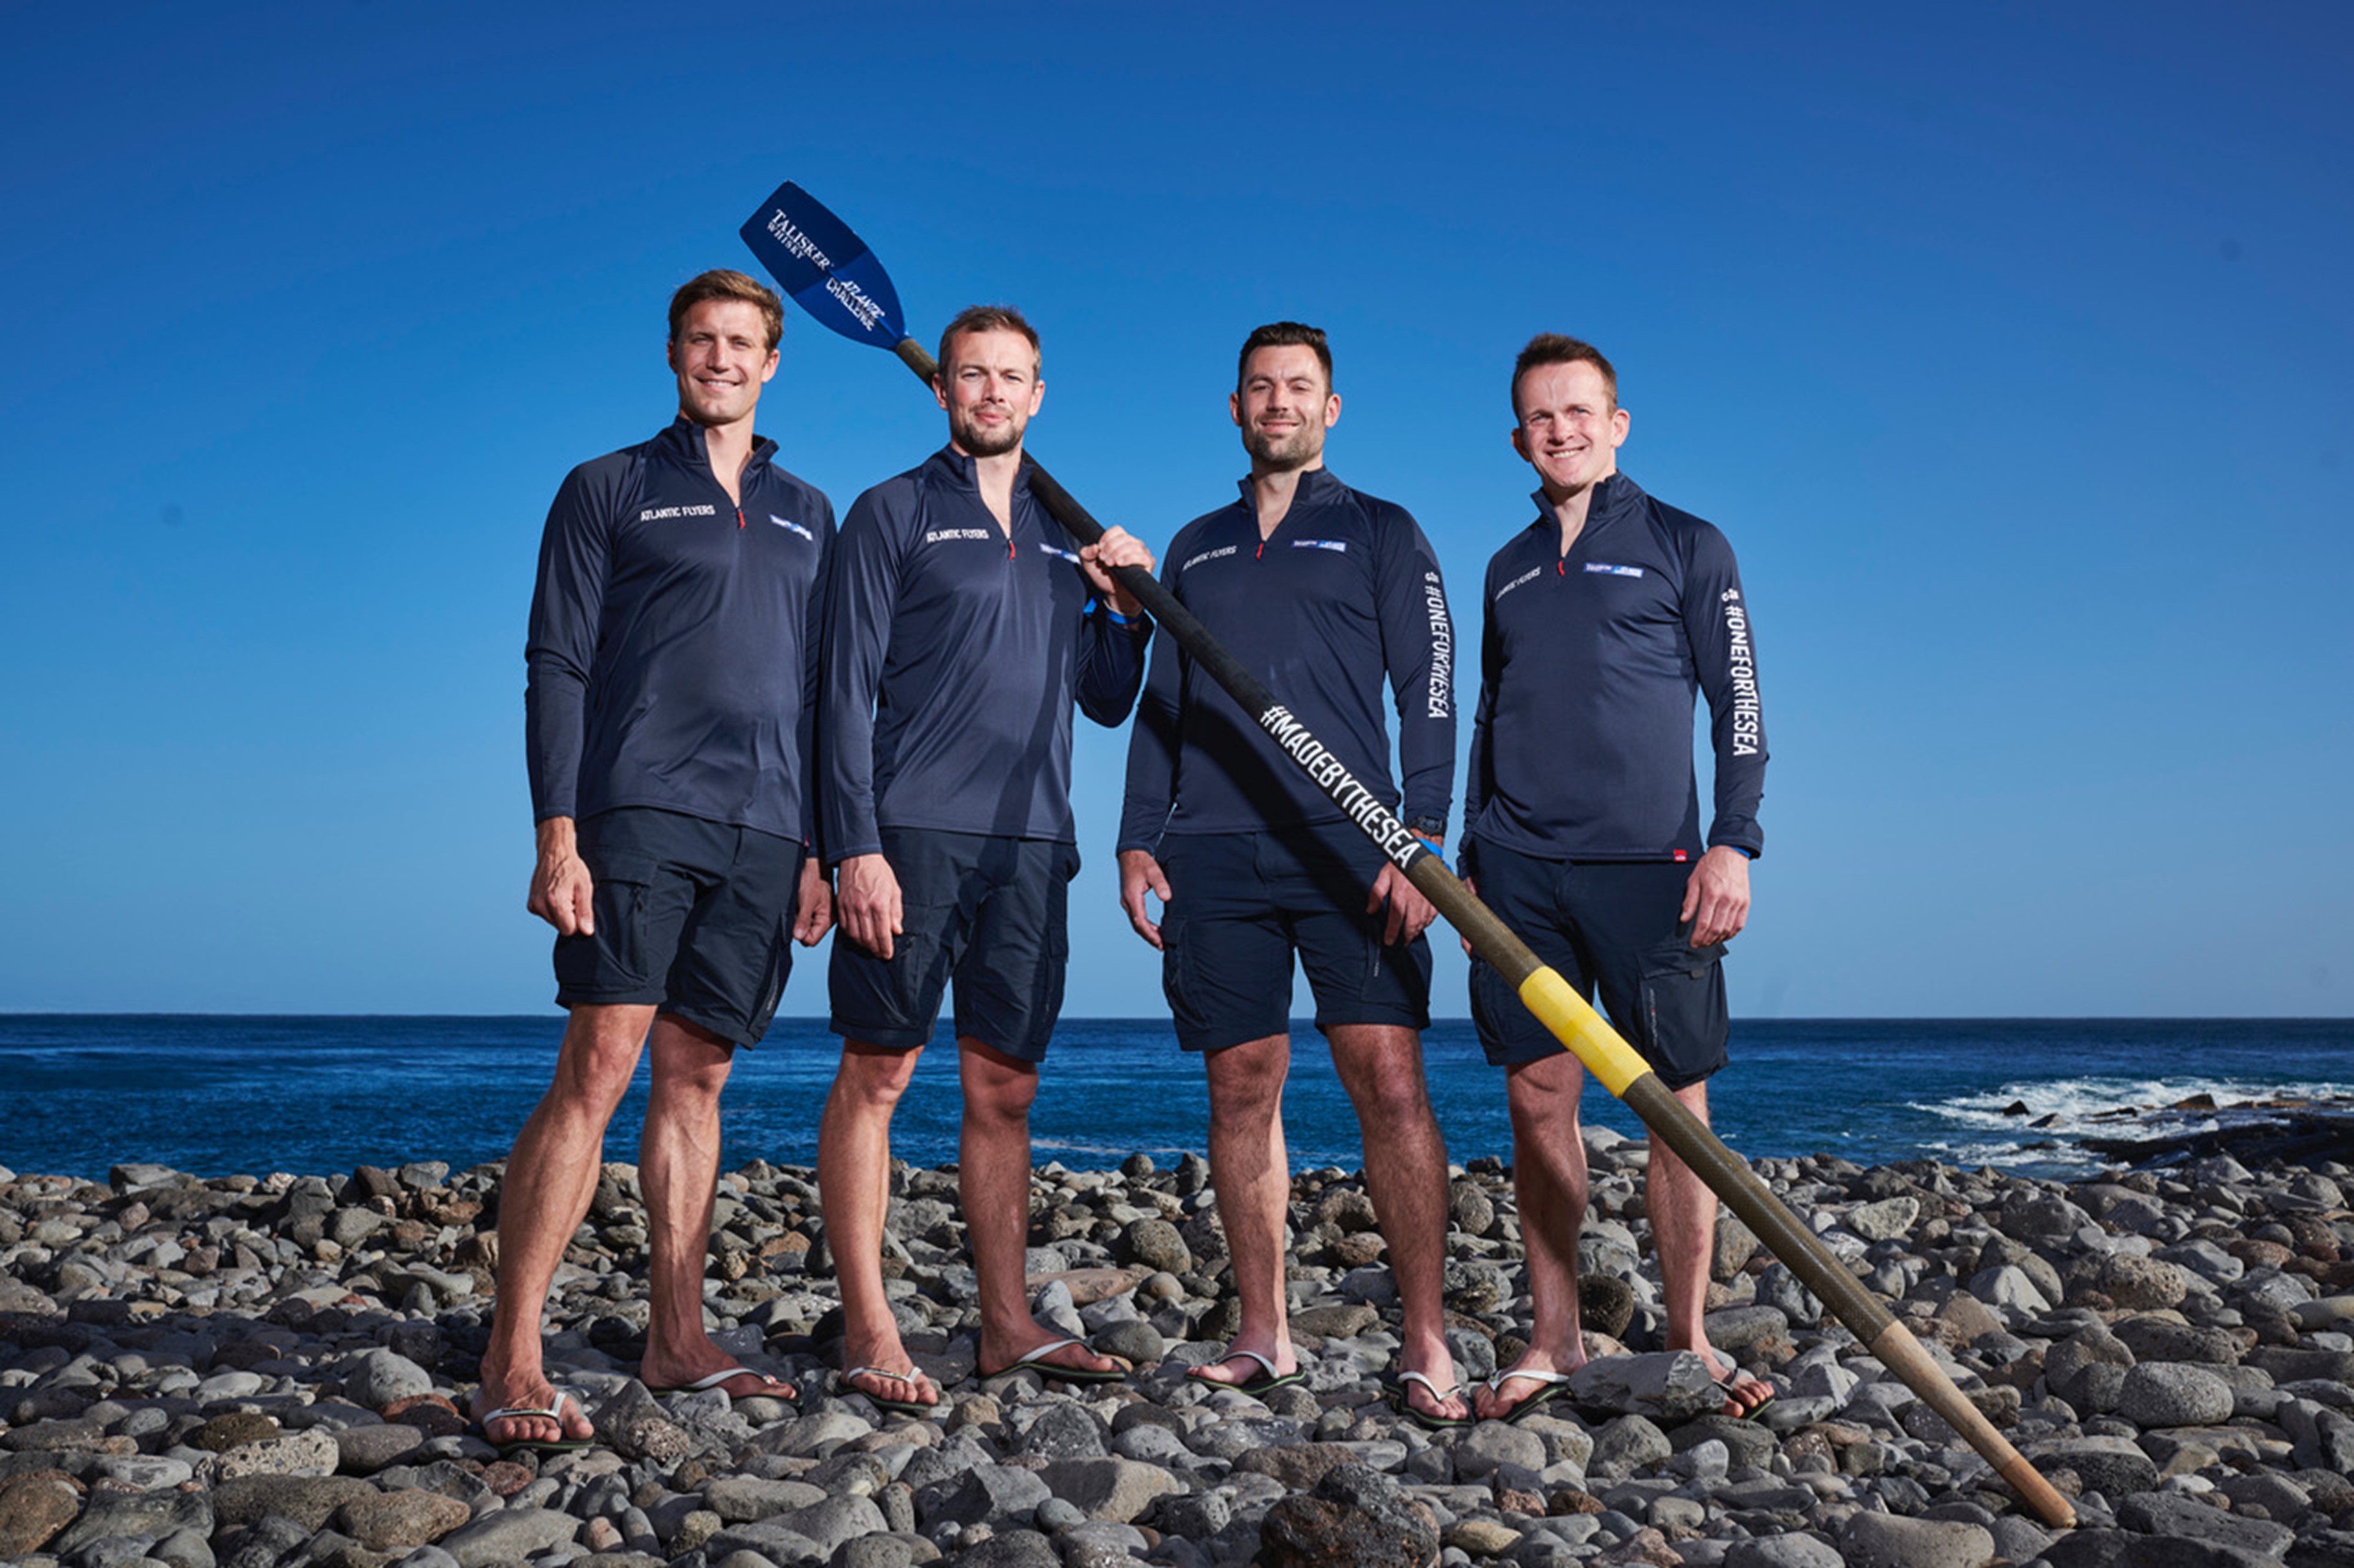 Rowers stand on rock beach with oar.